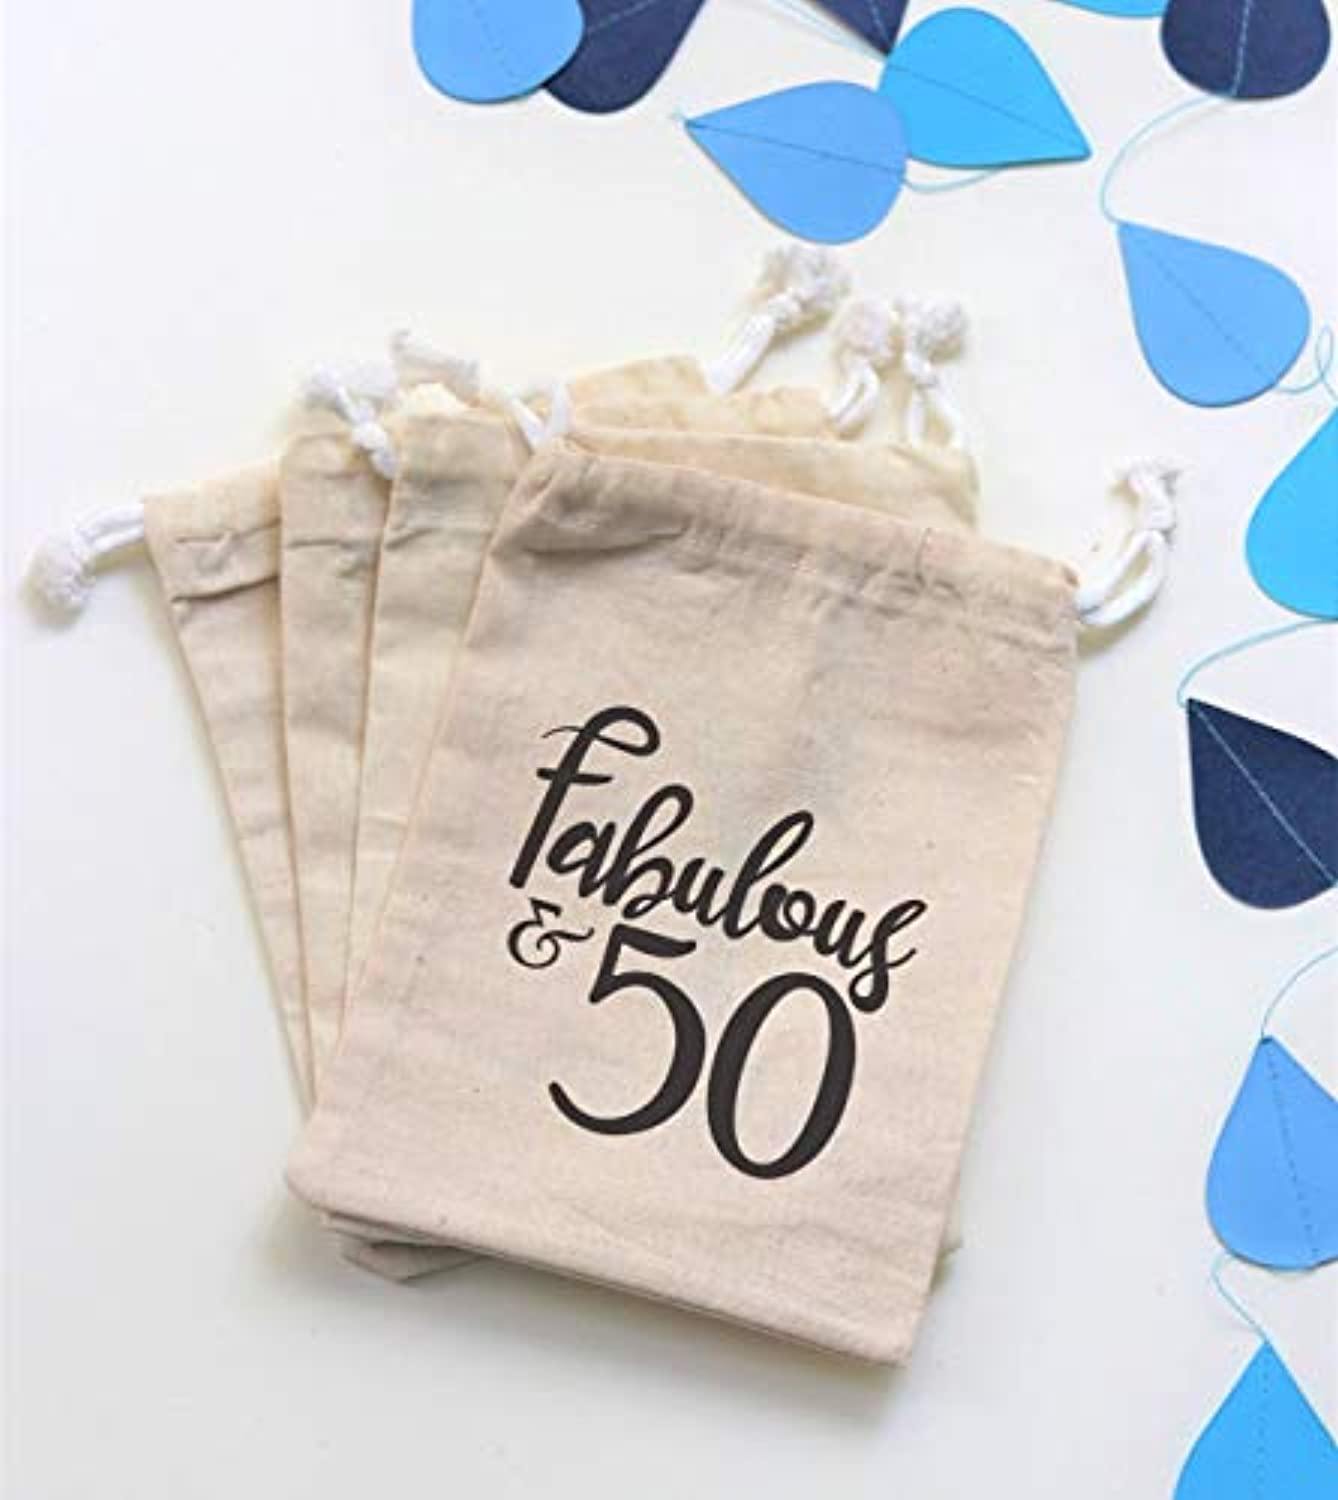 Fabulous Fifty 50th Birthday Party bag Favor Bags 50th Birthday